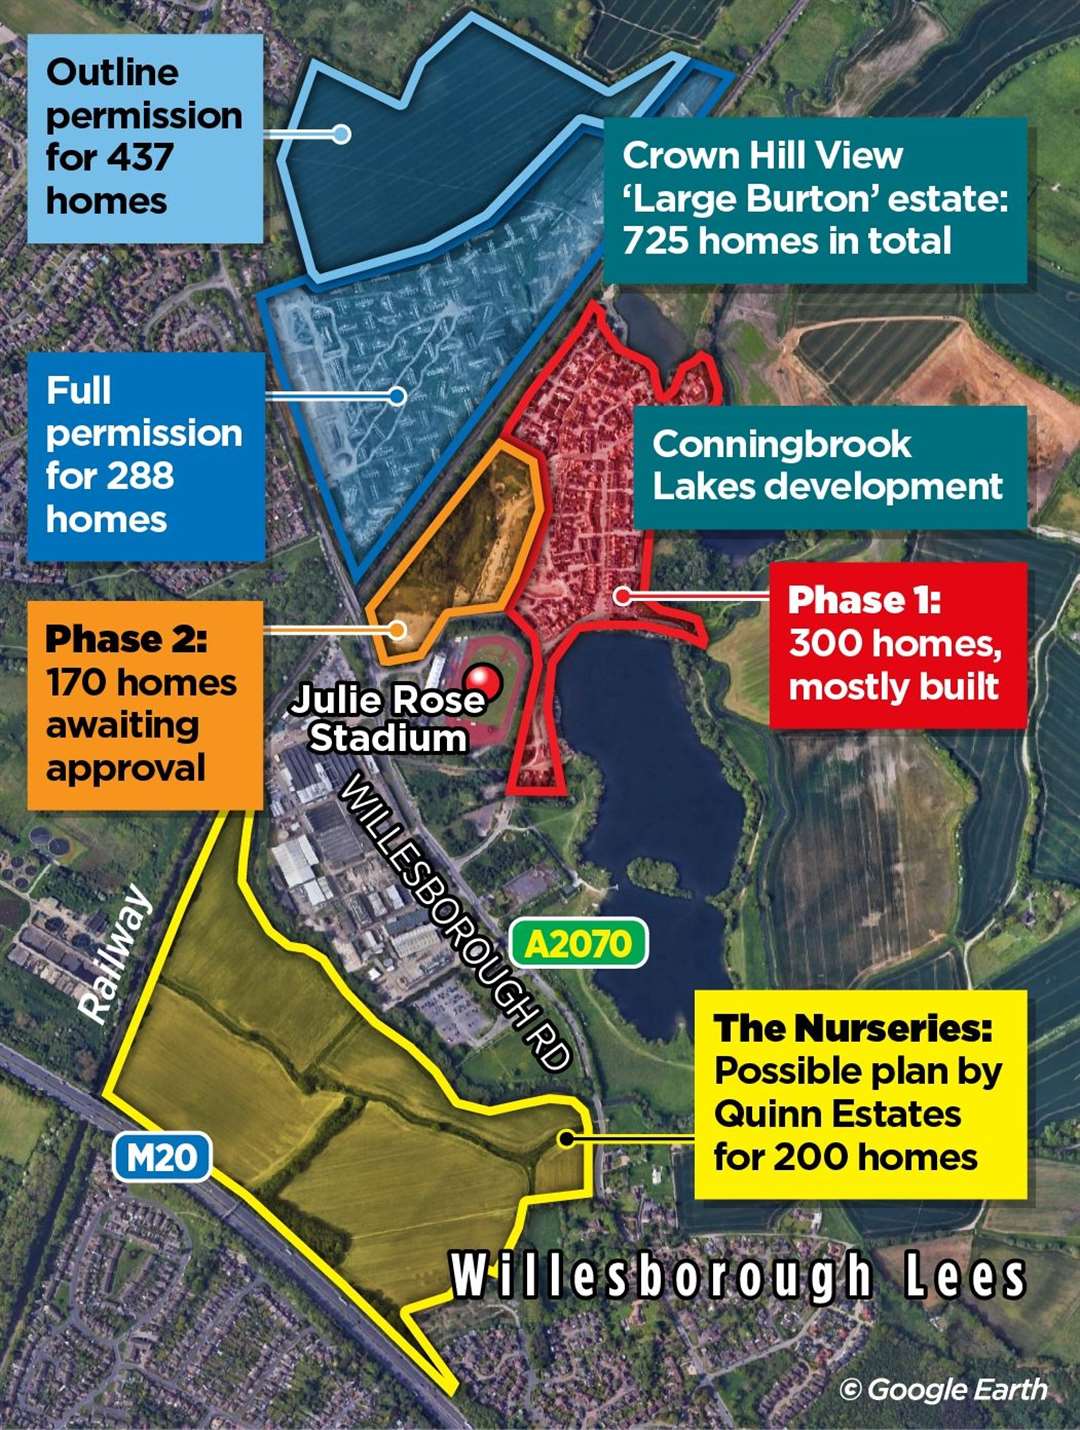 The Nurseries would be near developments at Crown Hill View, and Conningbrook Lakes